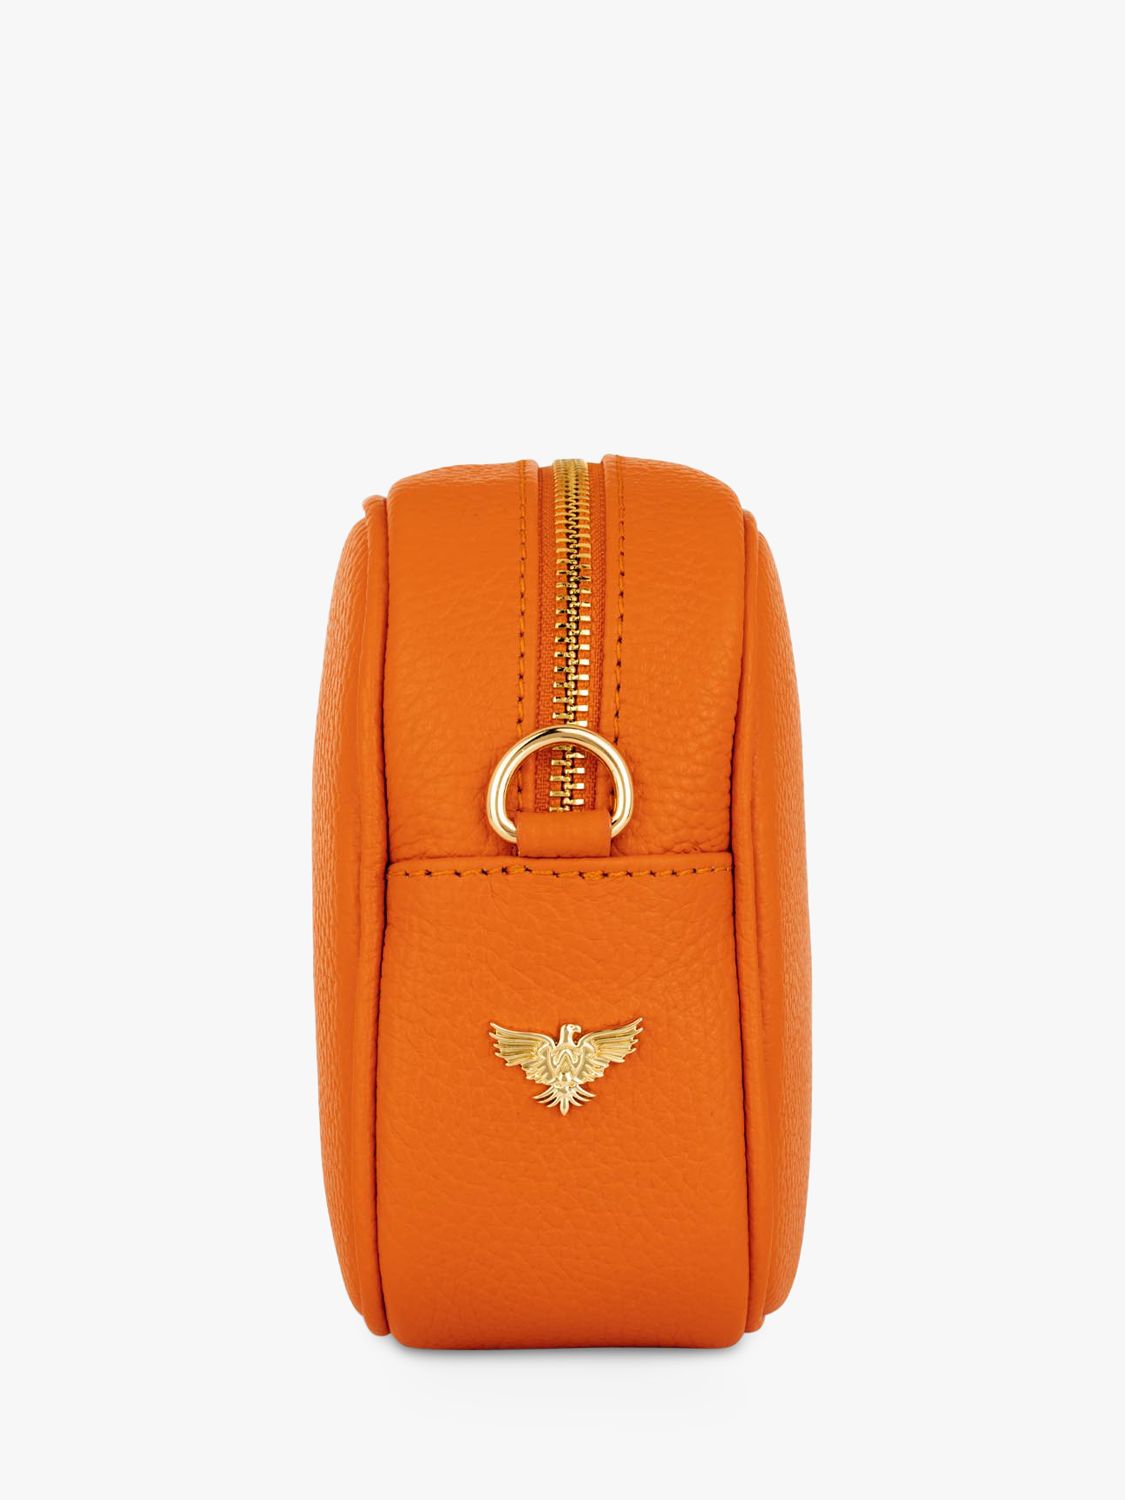 Buy Apatchy Leather Crossbody Bag Online at johnlewis.com